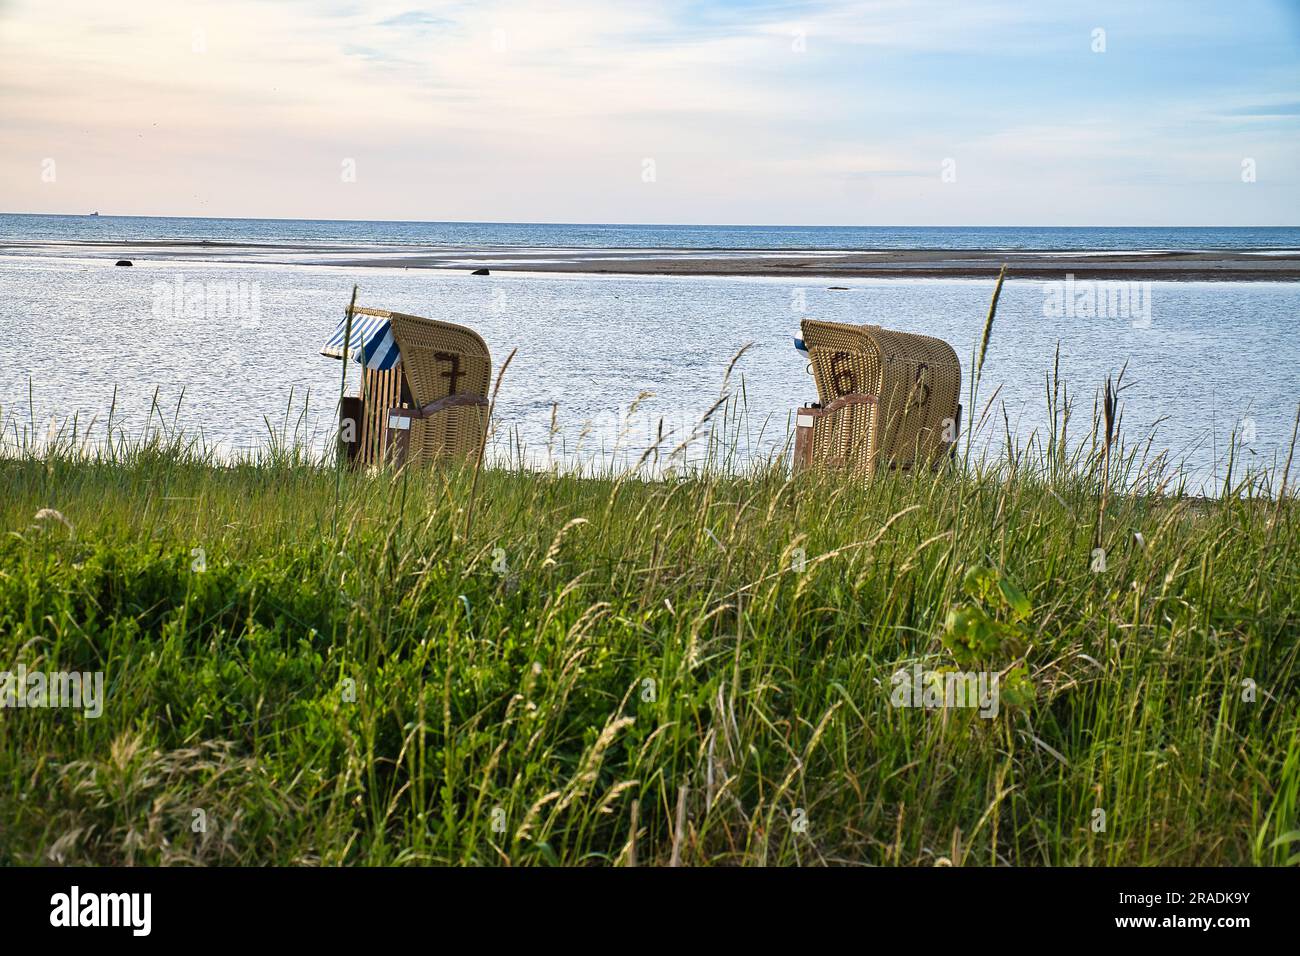 Beach chair in the sand in front of the Baltic Sea on the island of Poel at sunset. Dune grass by the sea. Landscape shot from the coast Stock Photo